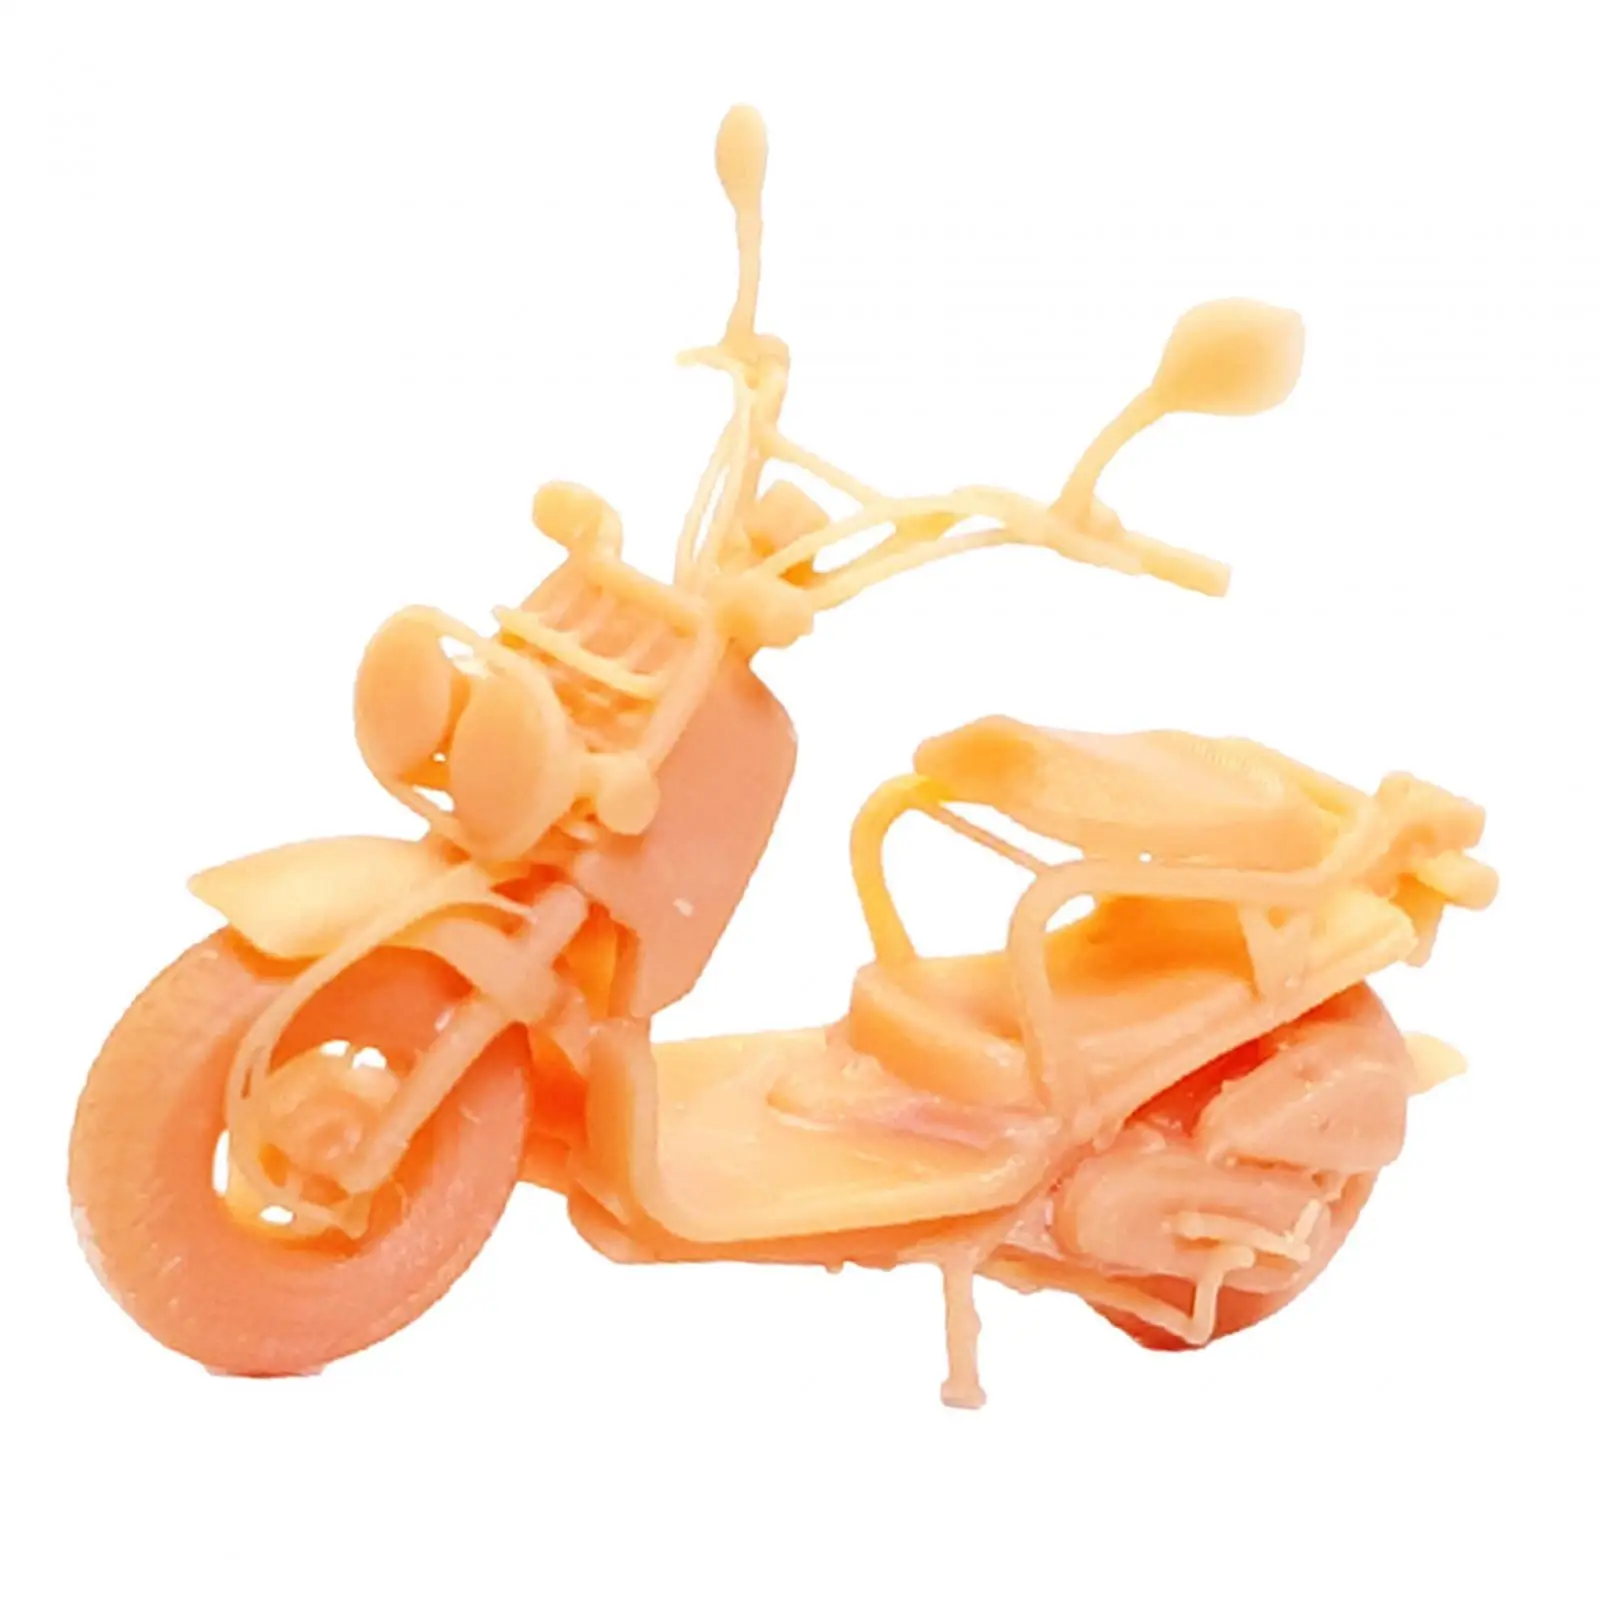 1/64 Miniature Motorcycle Model Collectibles Sand Table Ornament Diorama Motorcycle Toys for Micro Landscapes Decoration Layout